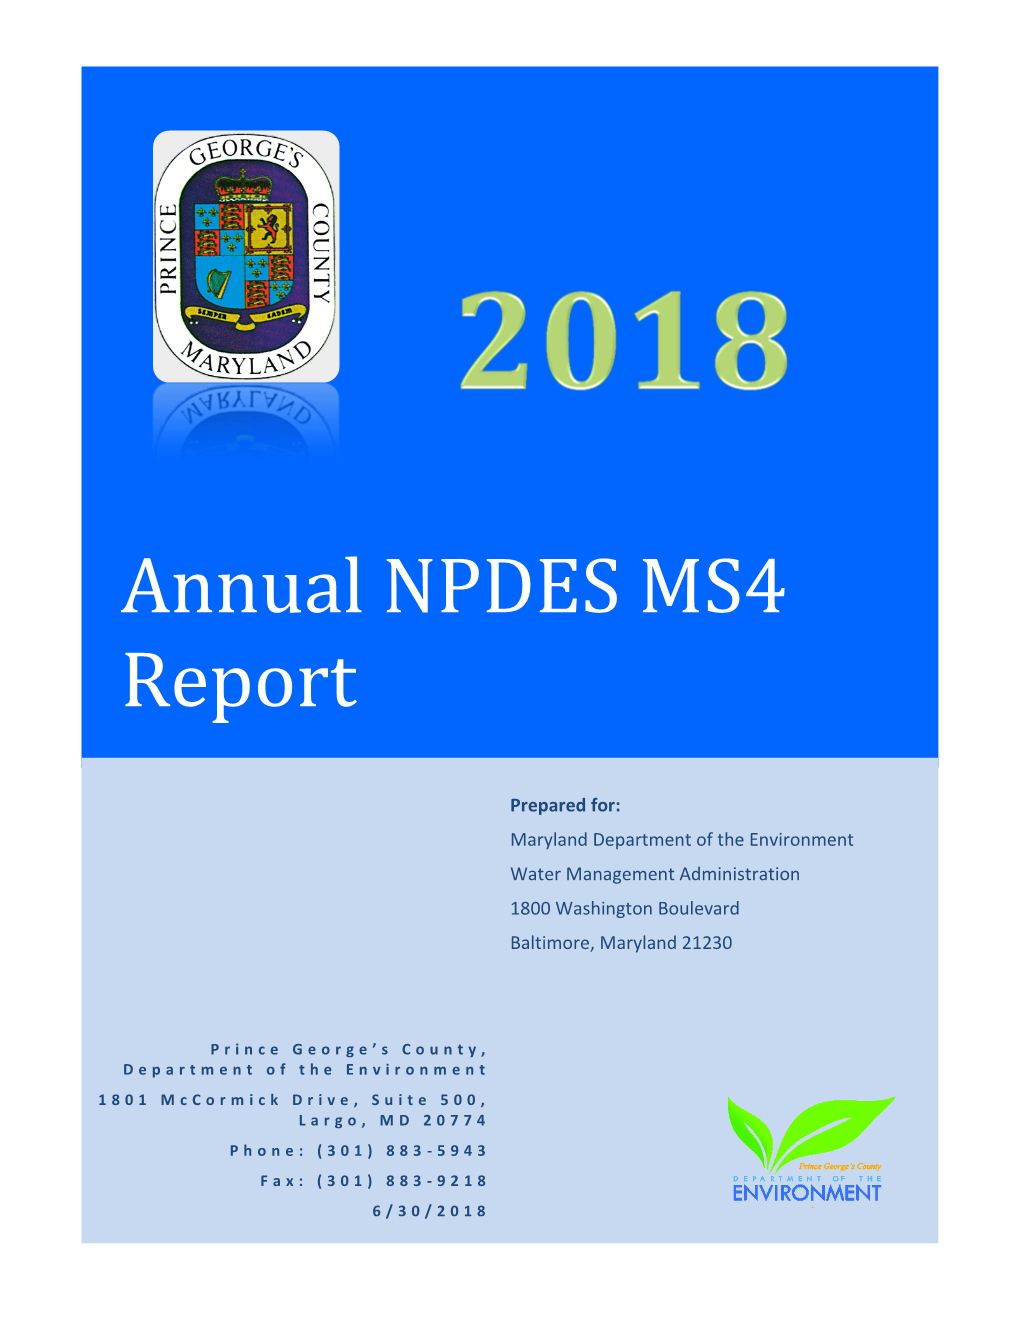 2018 NPDES MS4 Annual Report Submittal